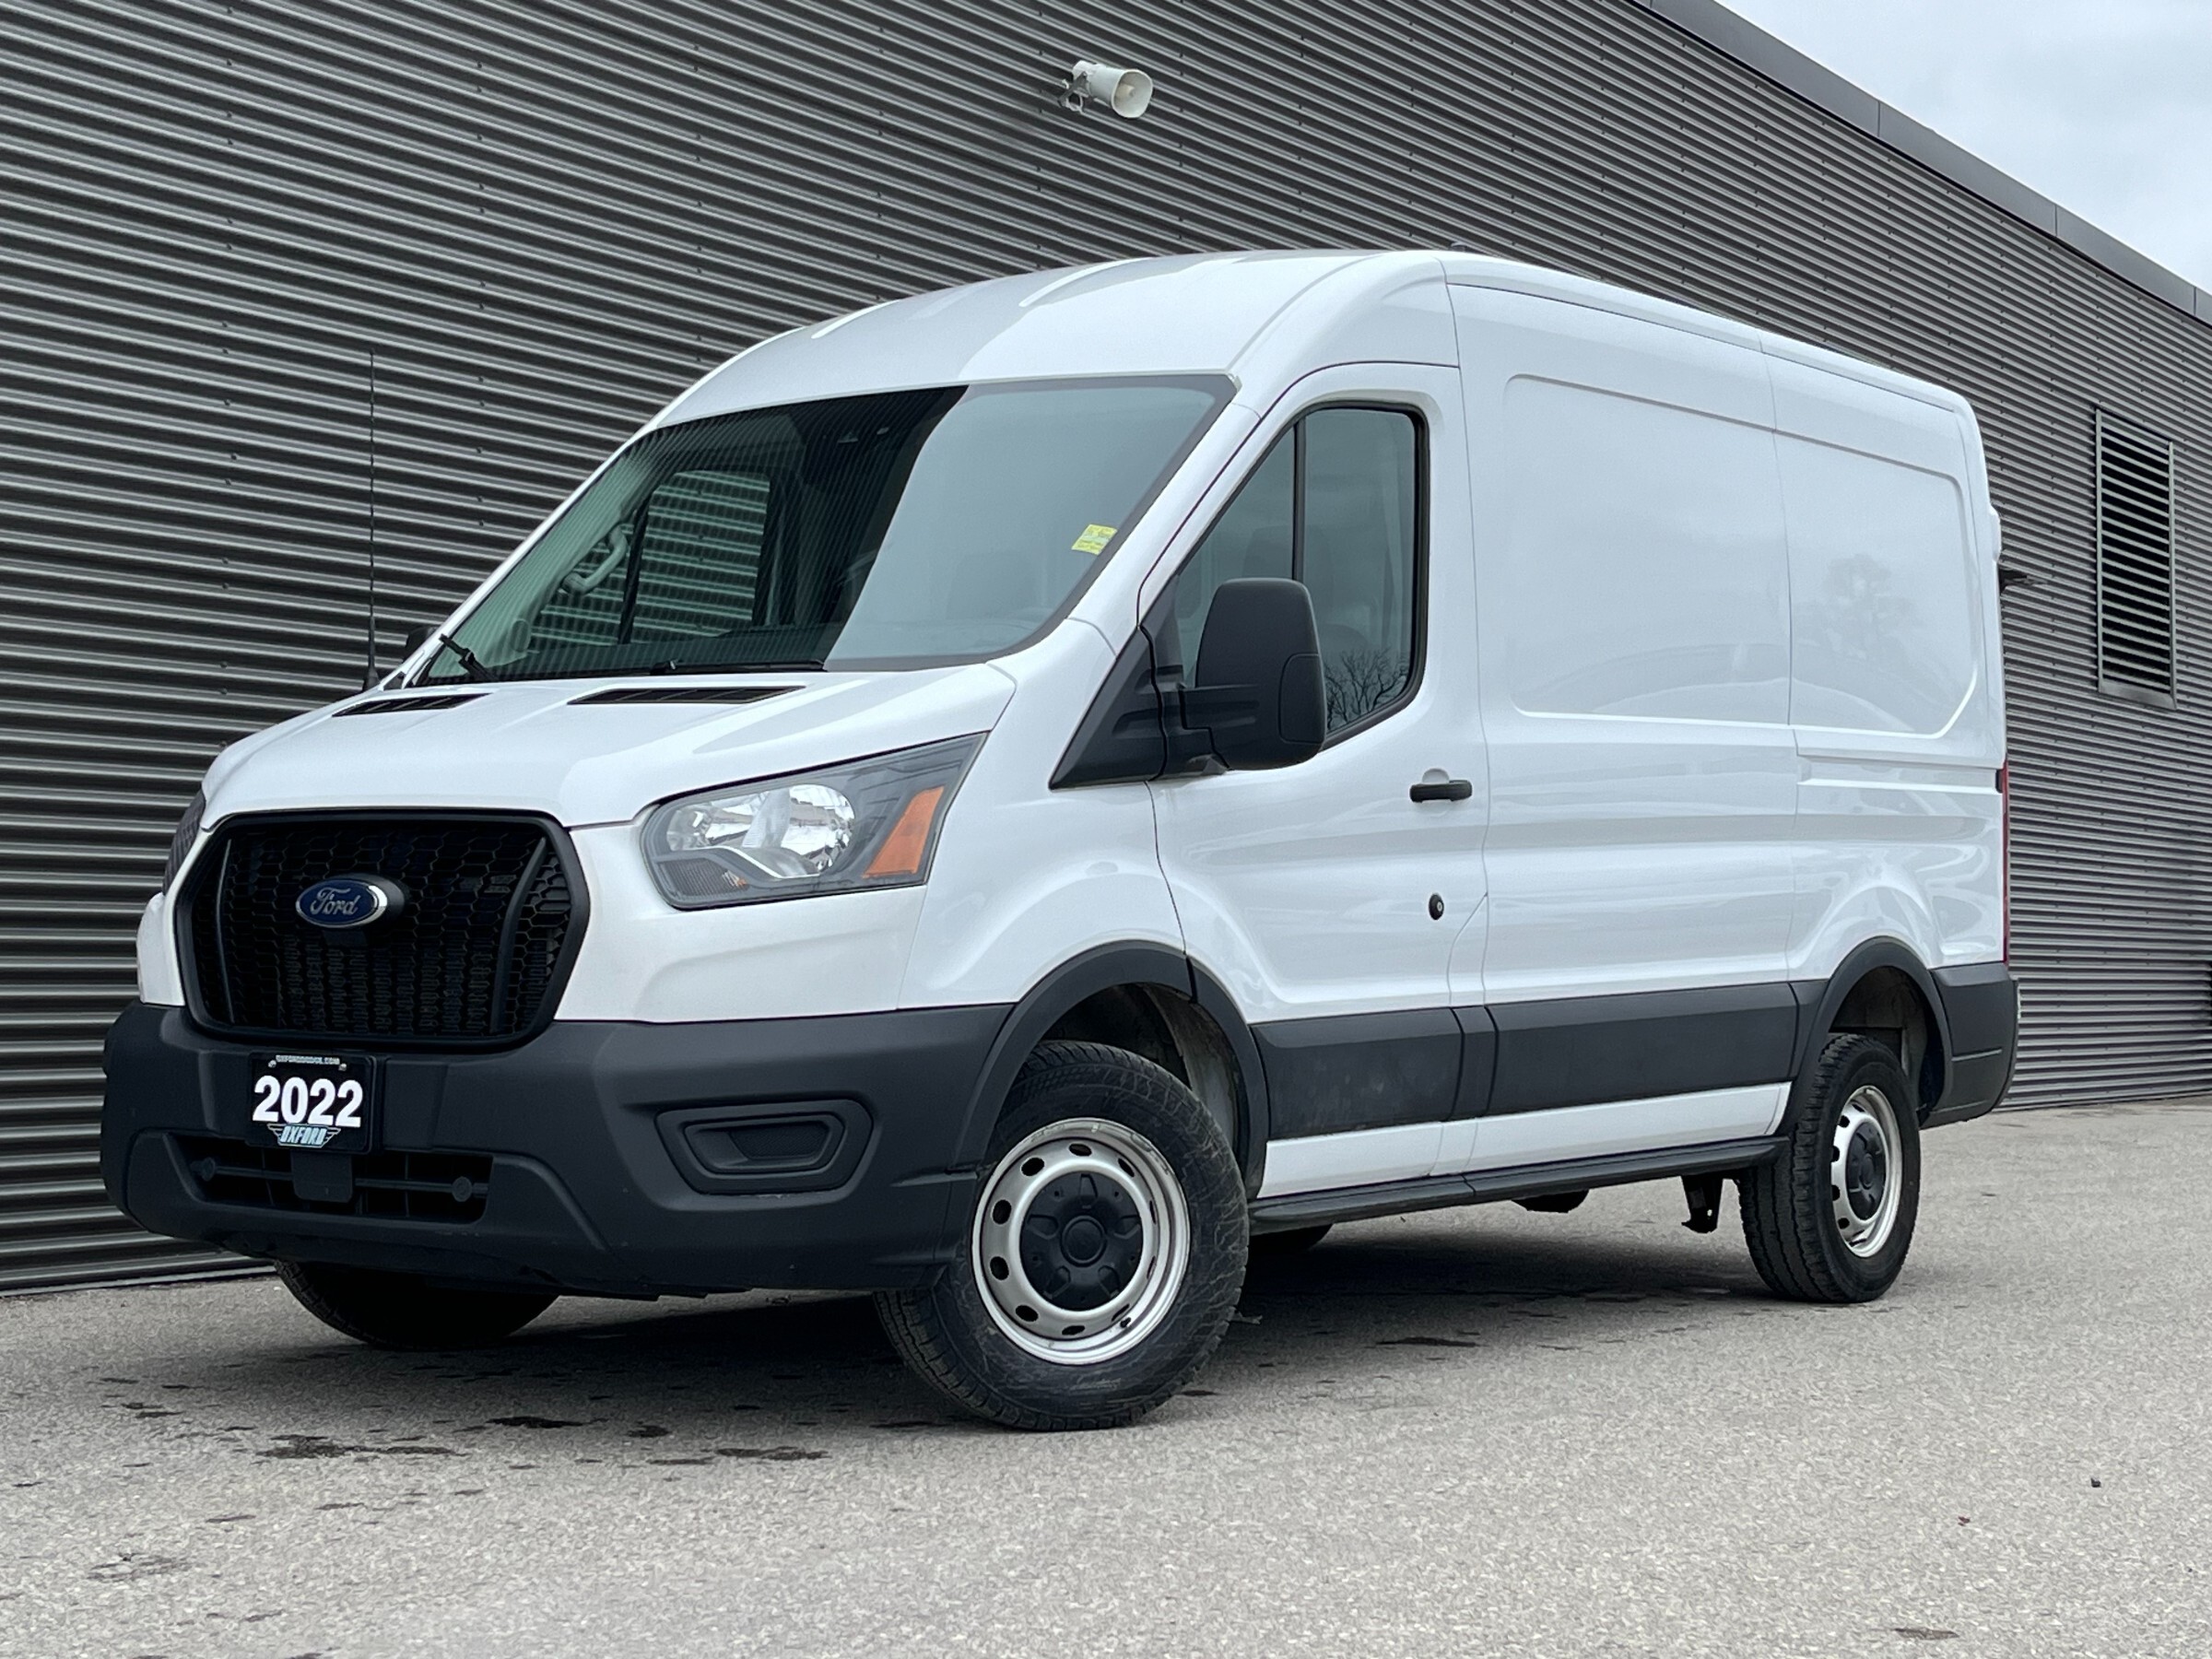 2022 Ford Transit Cargo Van Former Daily Rental, Clean Car Fax, Rare Find